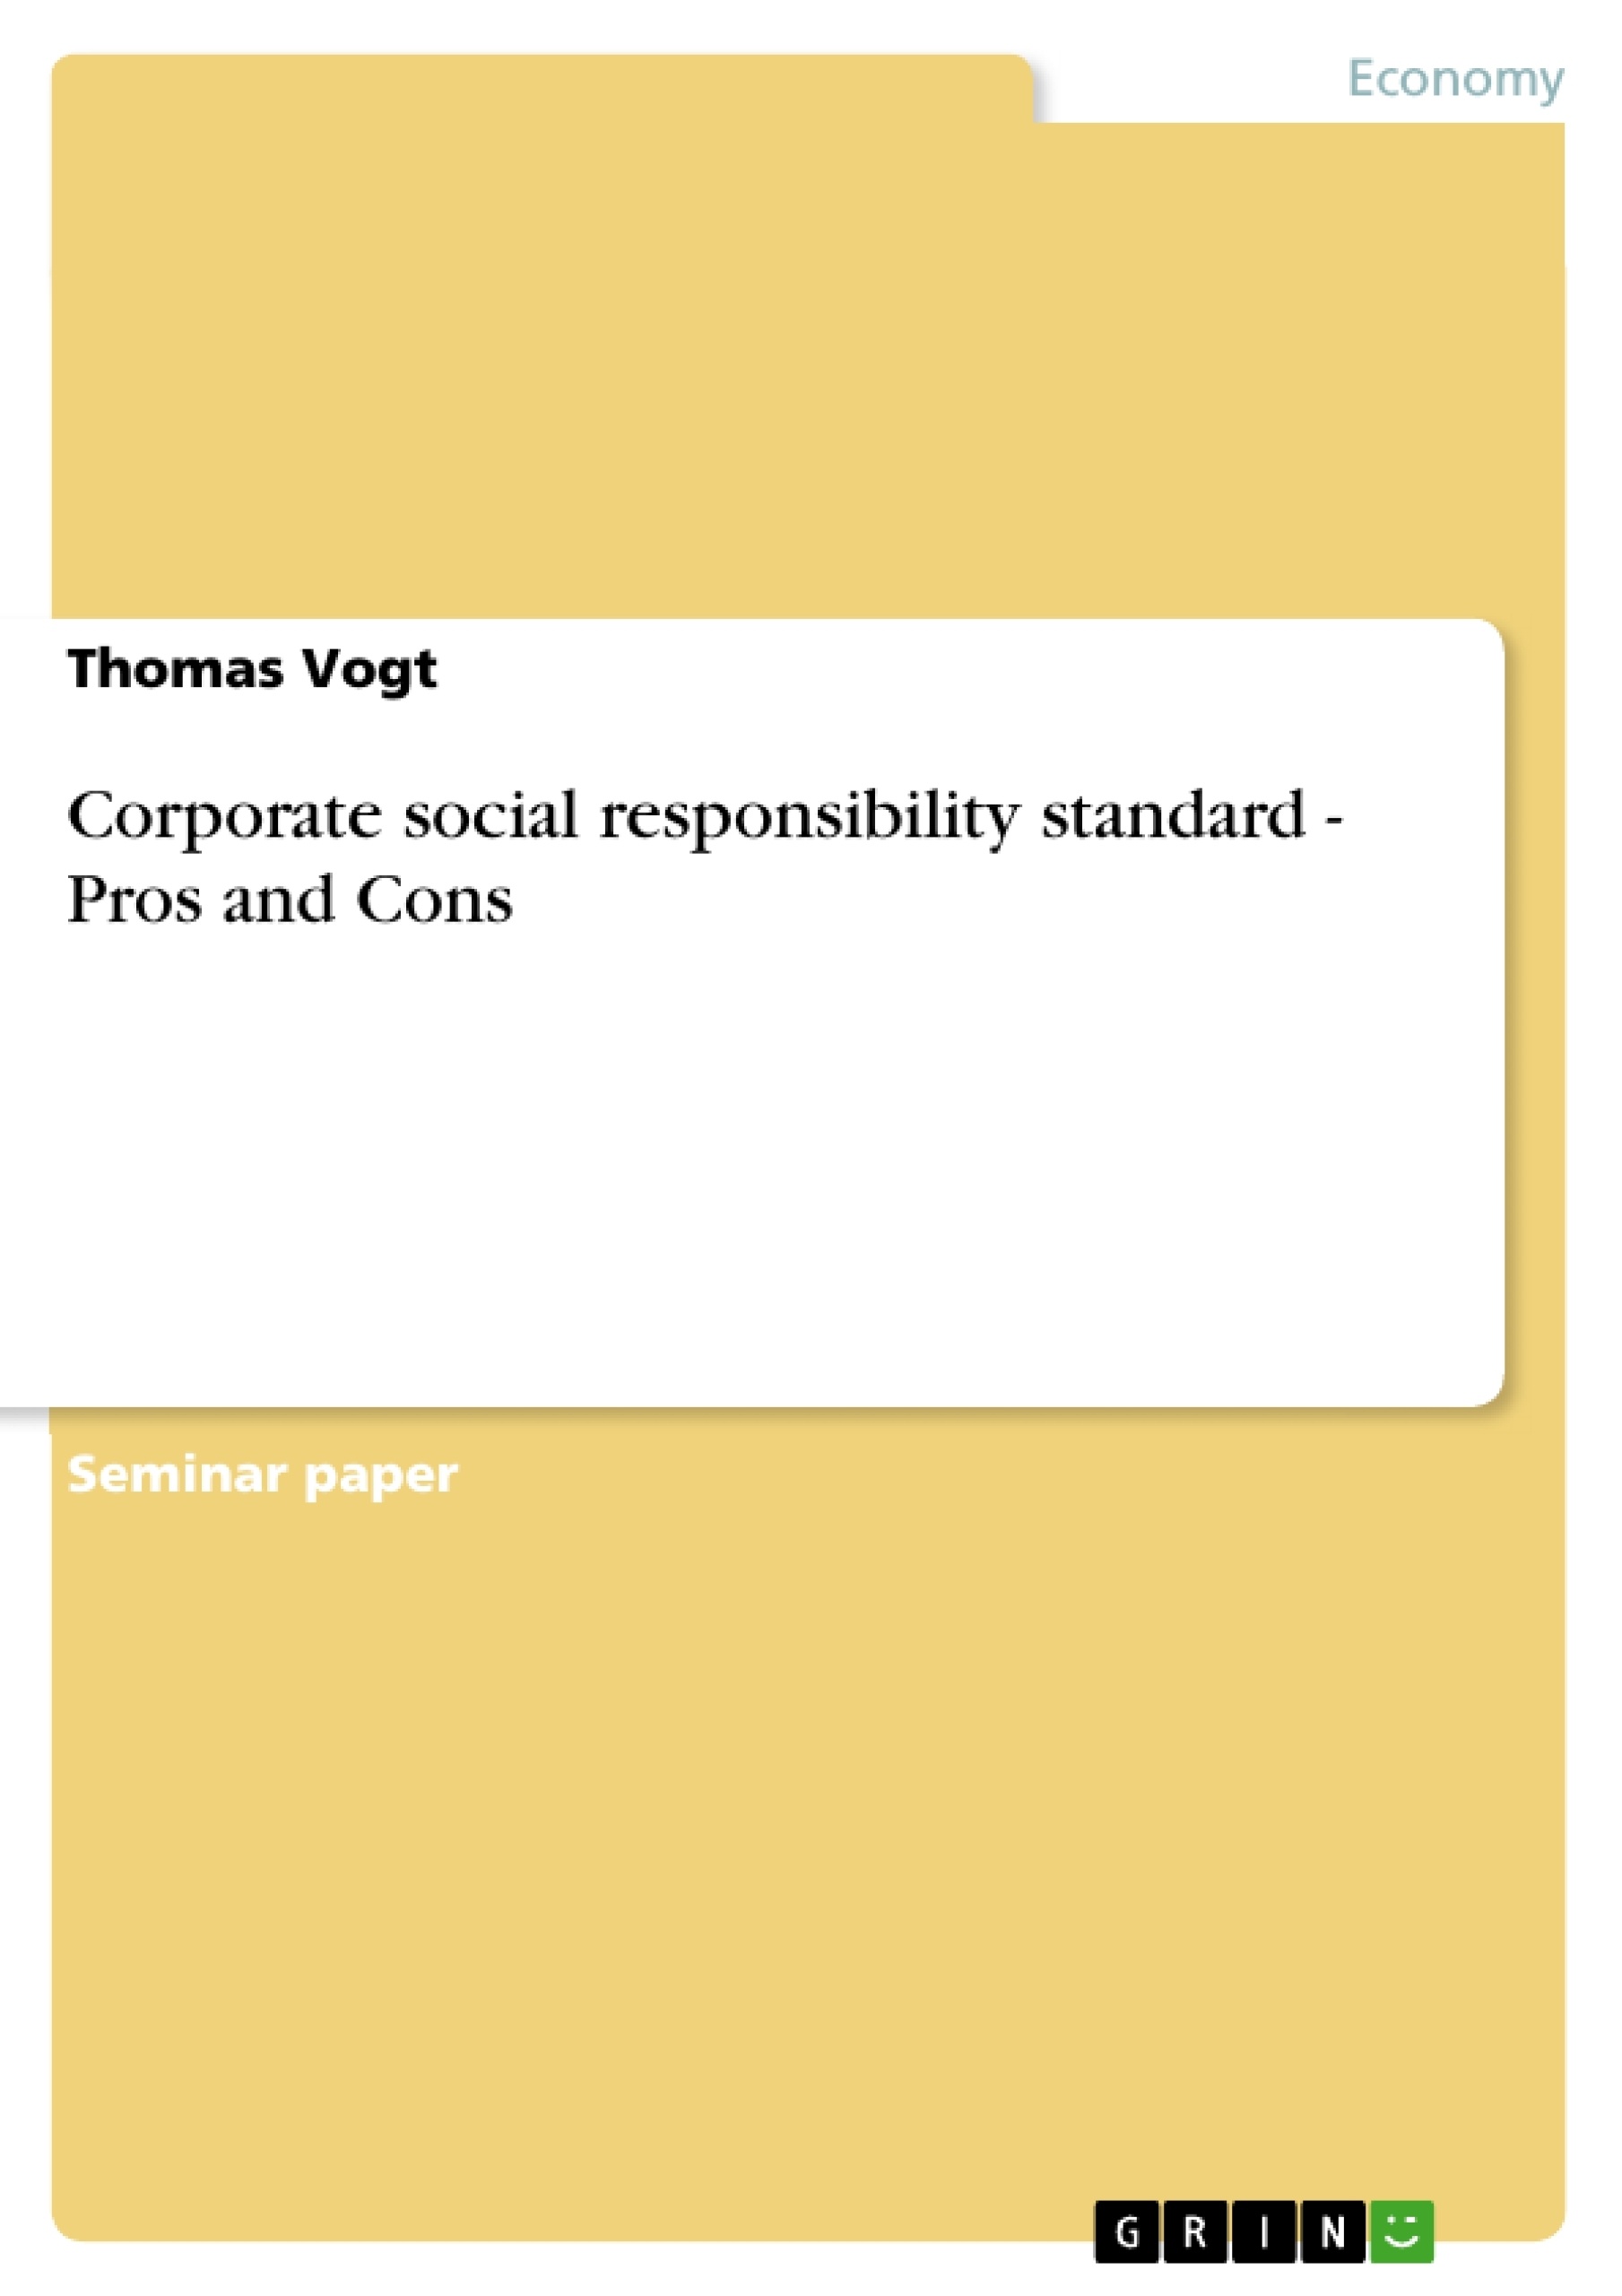 Title: Corporate social responsibility standard - Pros and Cons